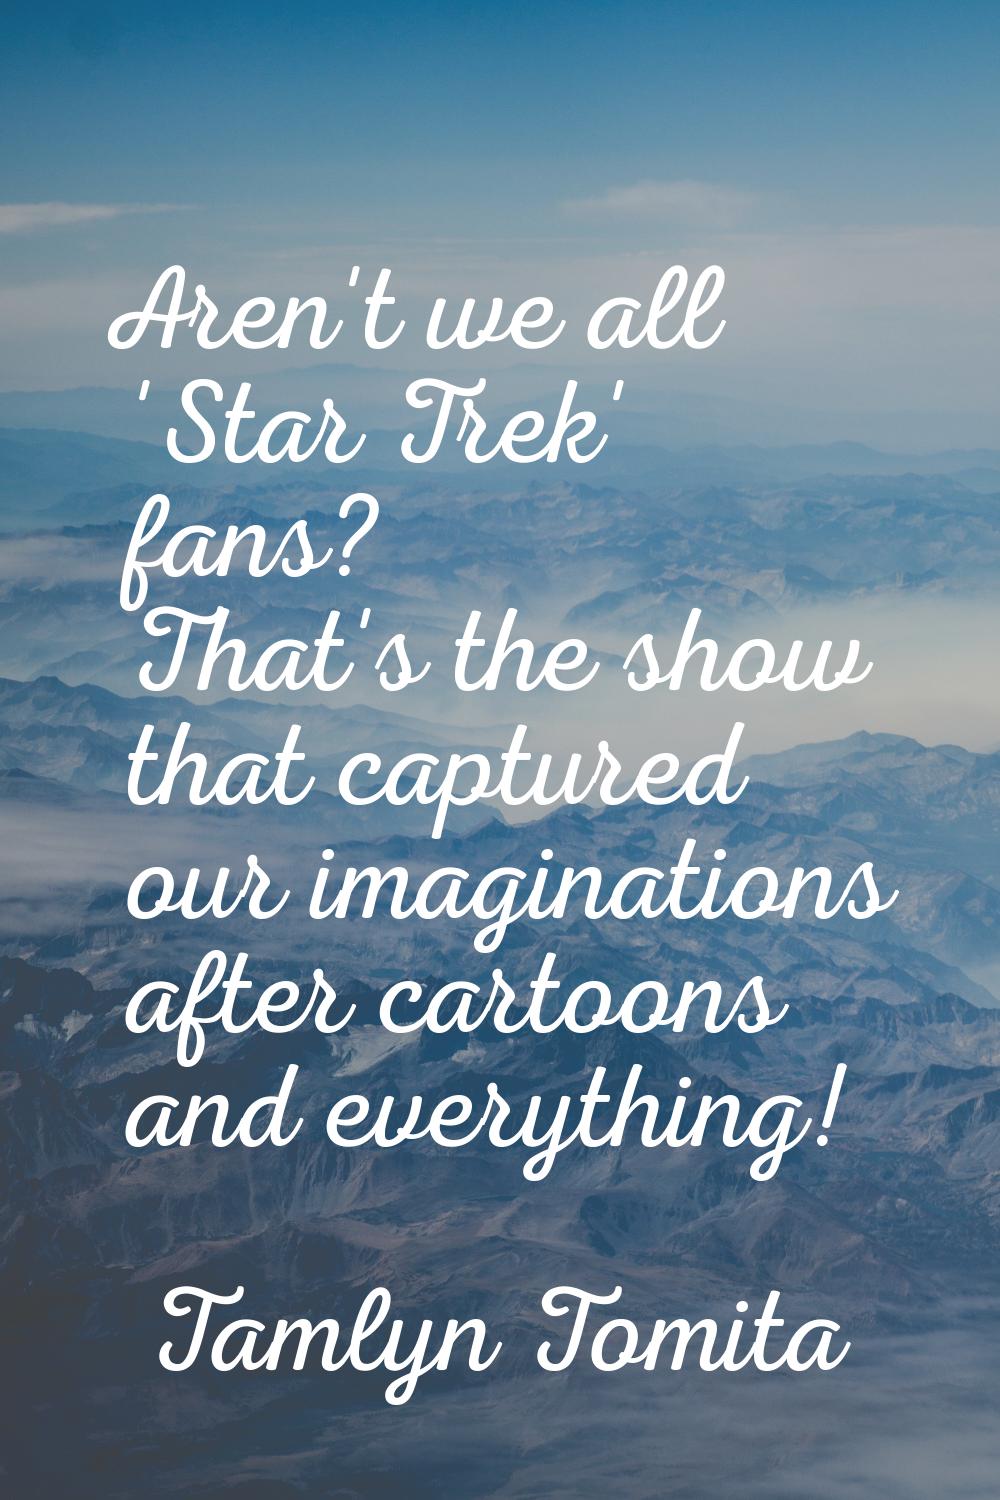 Aren't we all 'Star Trek' fans? That's the show that captured our imaginations after cartoons and e